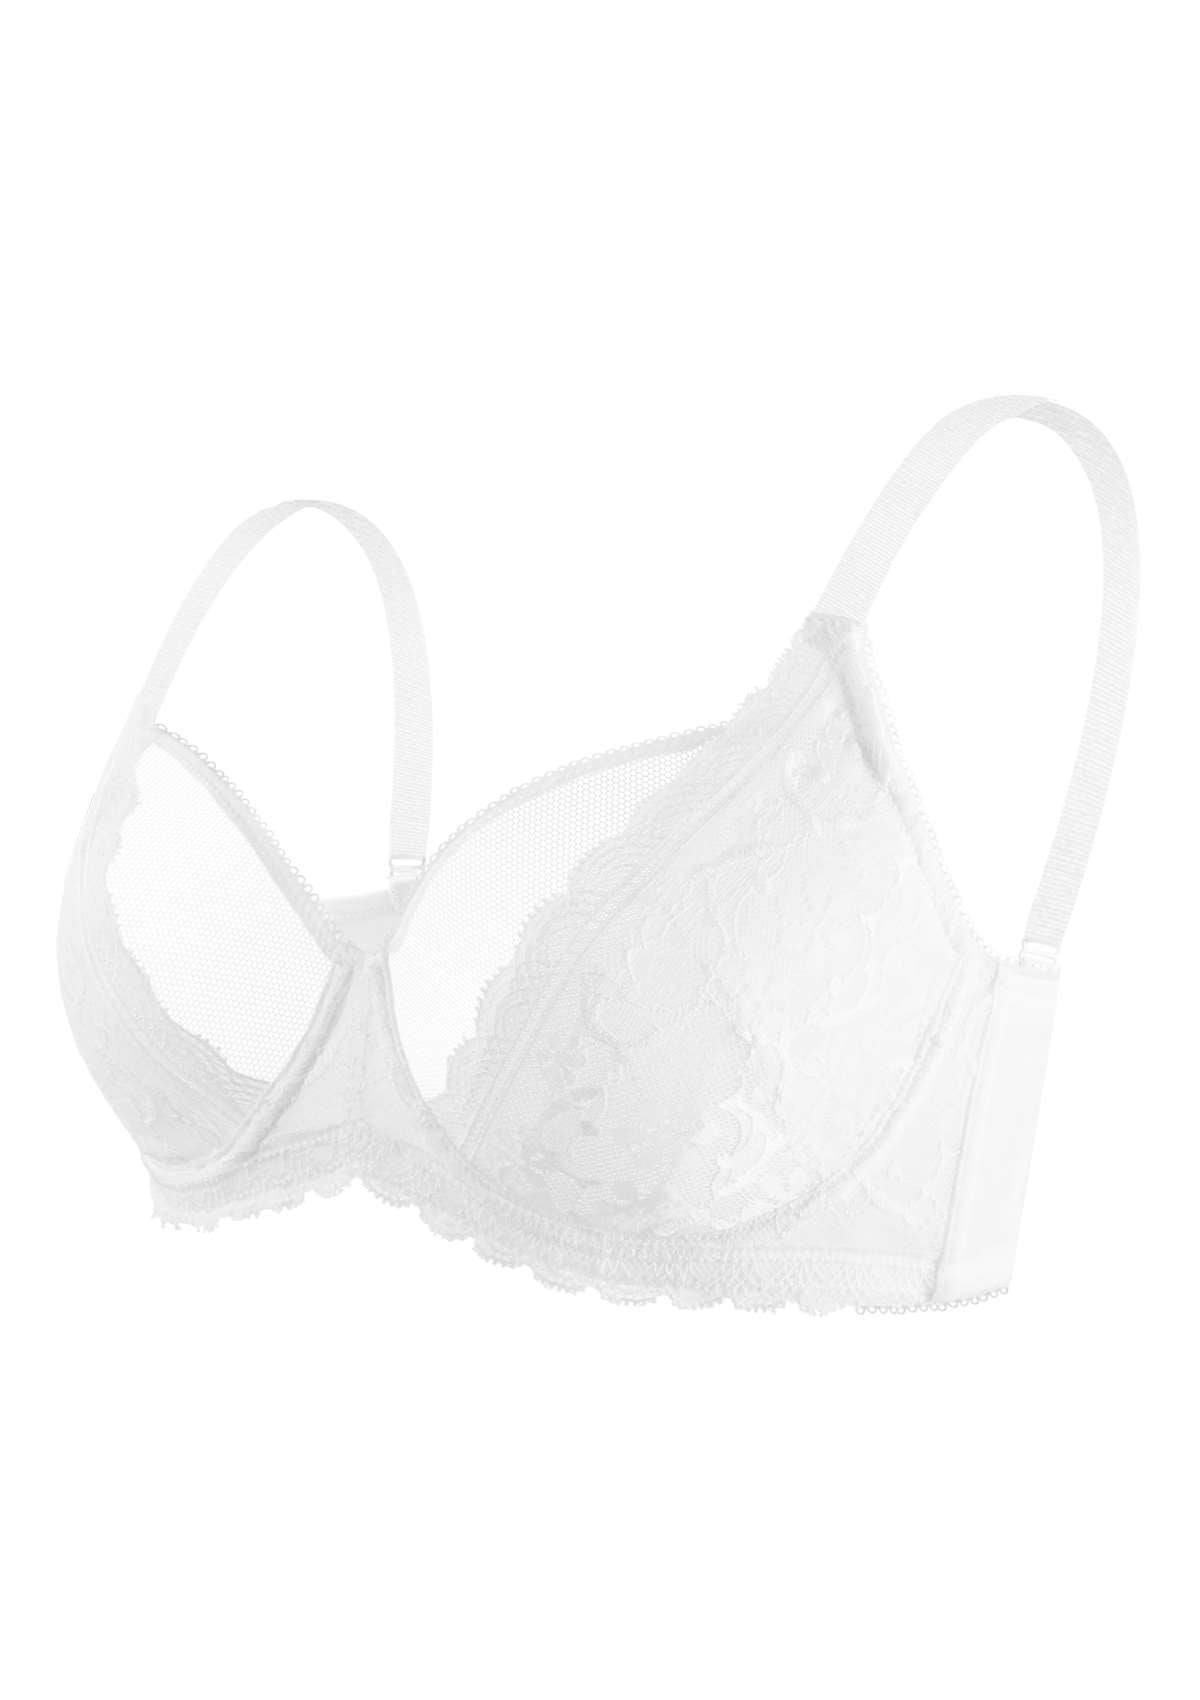 HSIA Anemone Big Bra: Best Bra For Lift And Support, Floral Bra - Light Blue / 42 / DD/E